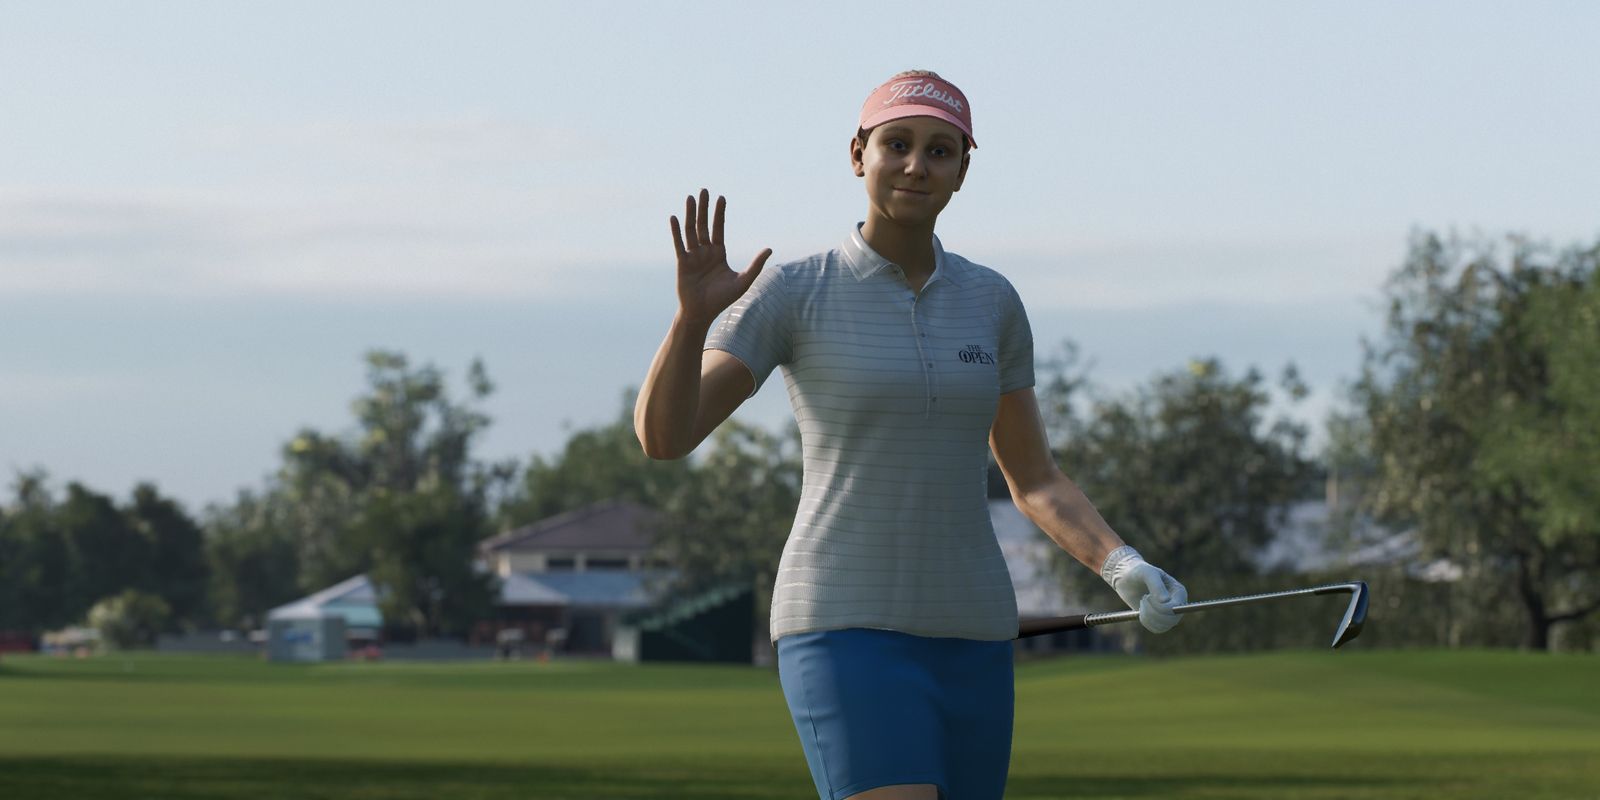 Player Character In EA Sports PGA Tour 23, holding a club and waving at the camera